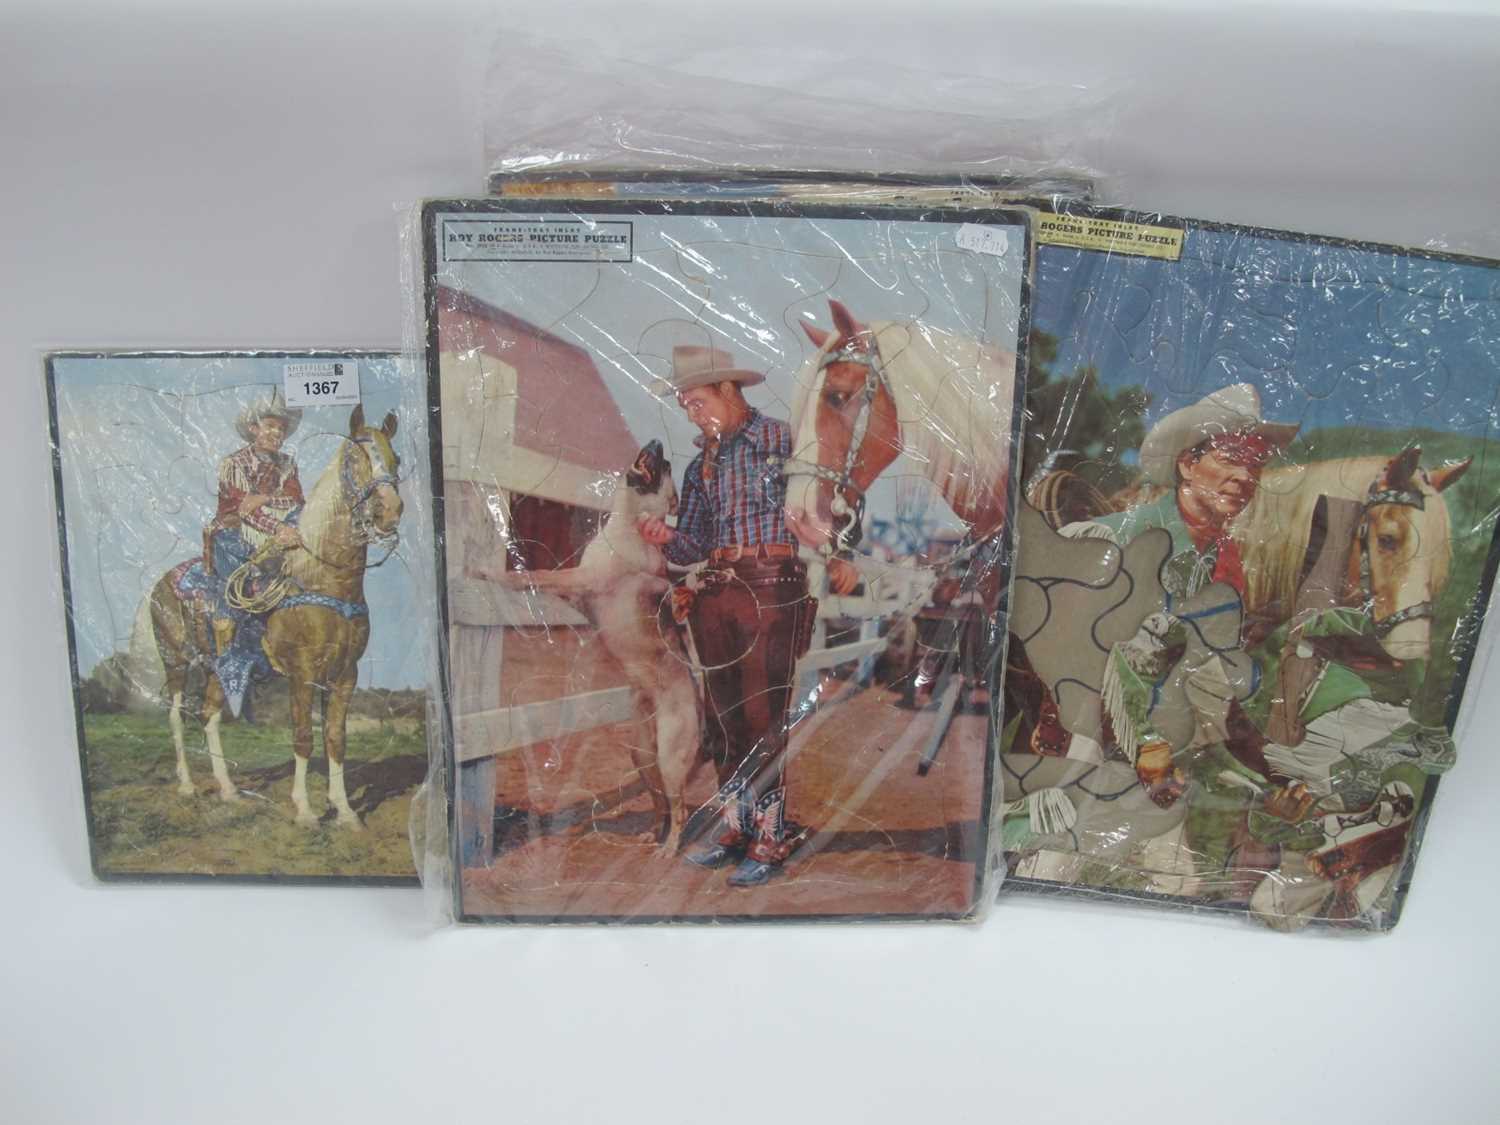 Roy Rogers Picture Puzzles, 'Frame-Tray Inlay' by Whitman Publishing, USA, 38 x 29cm, another